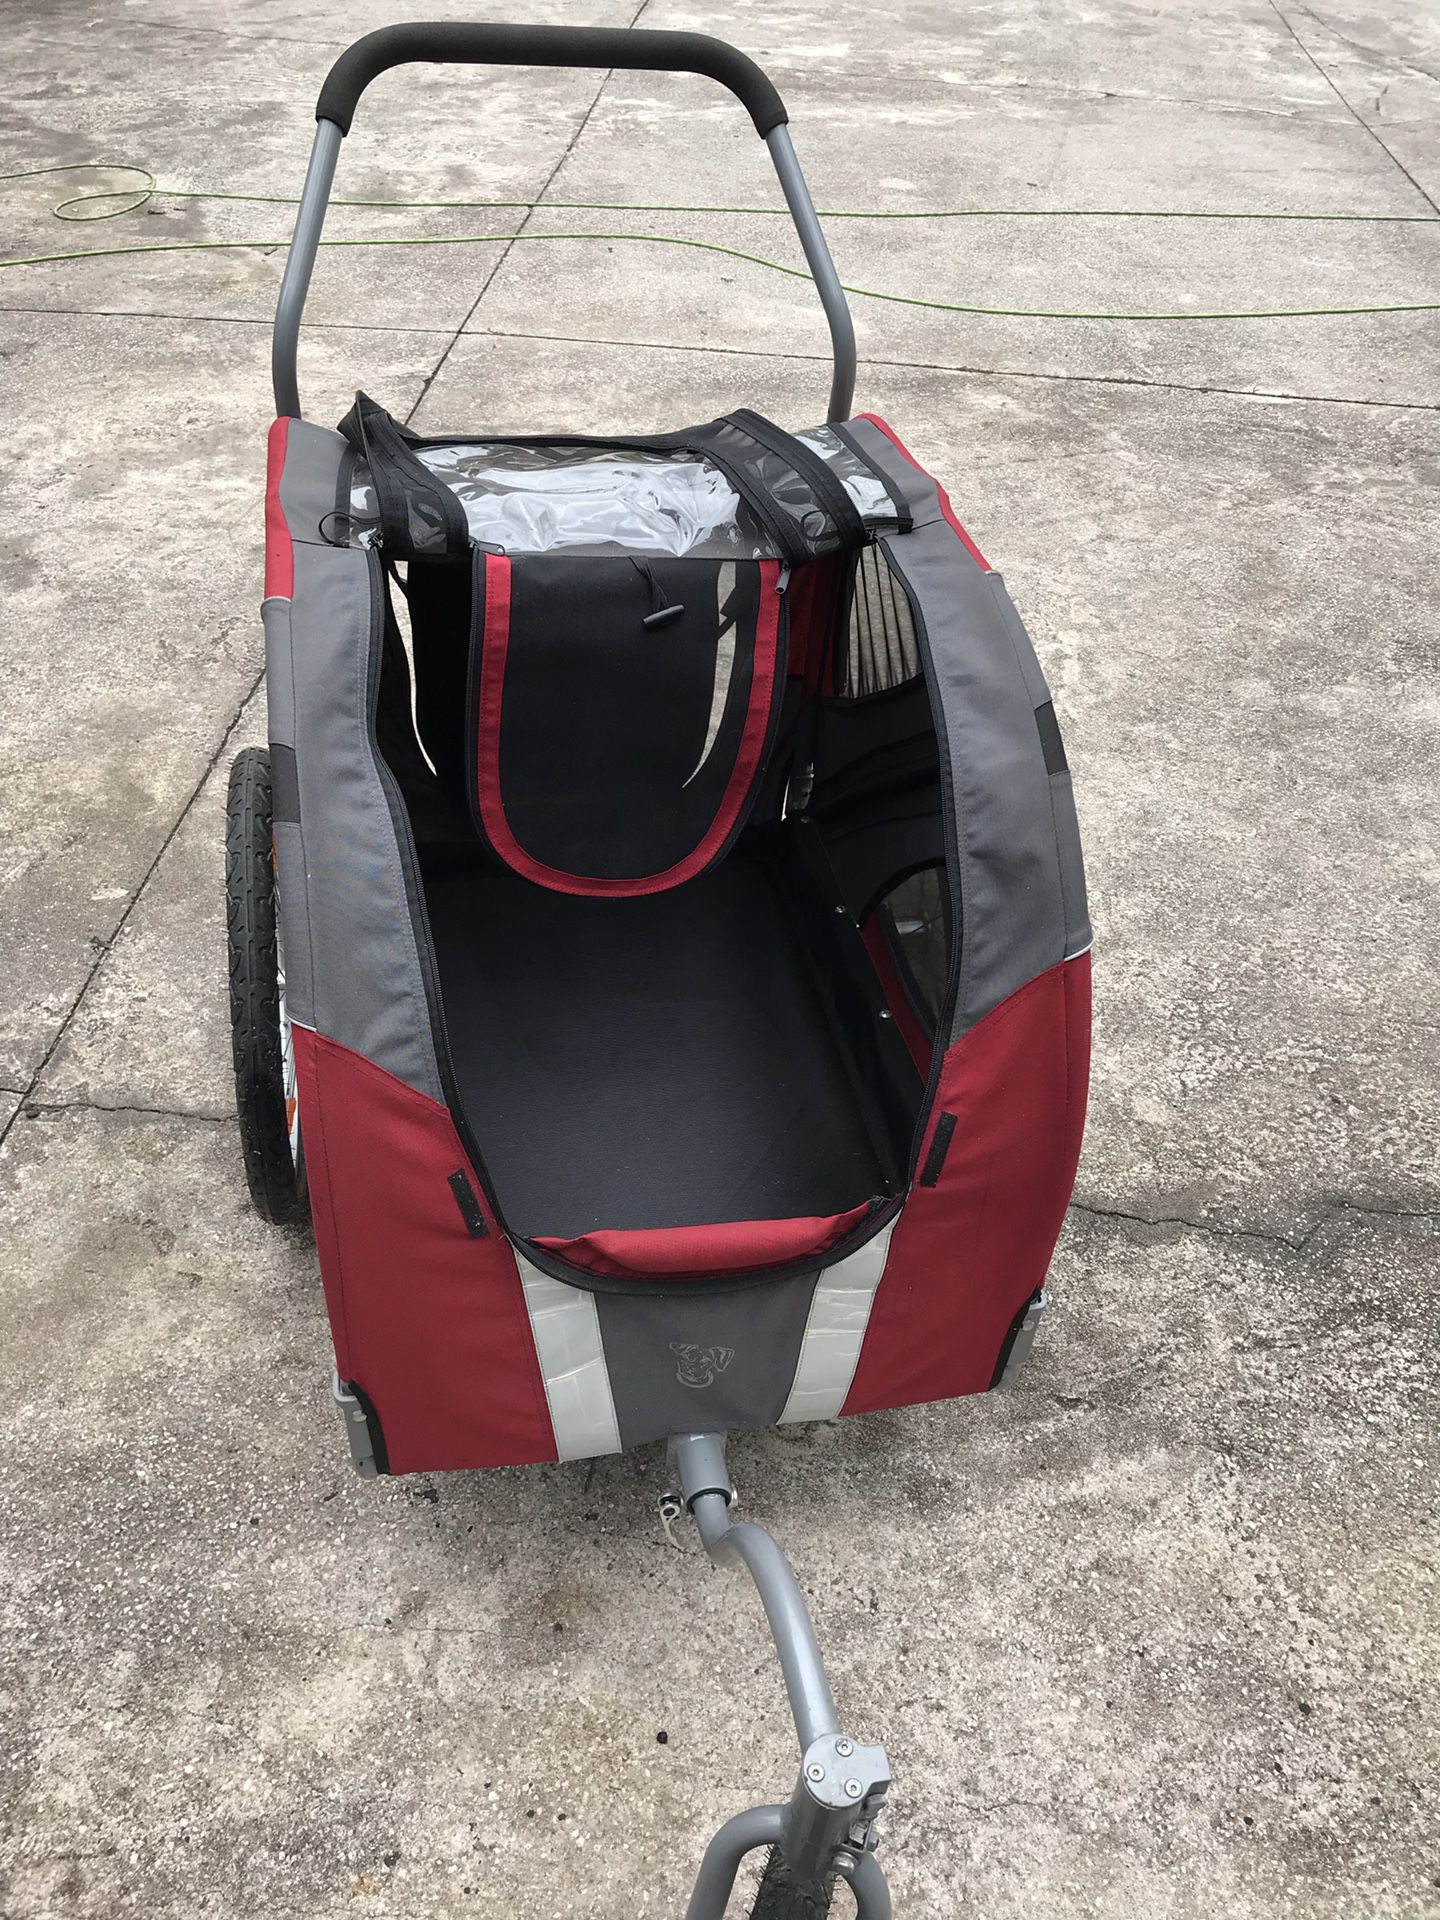 Doggyride dog stroller. Perfect condition